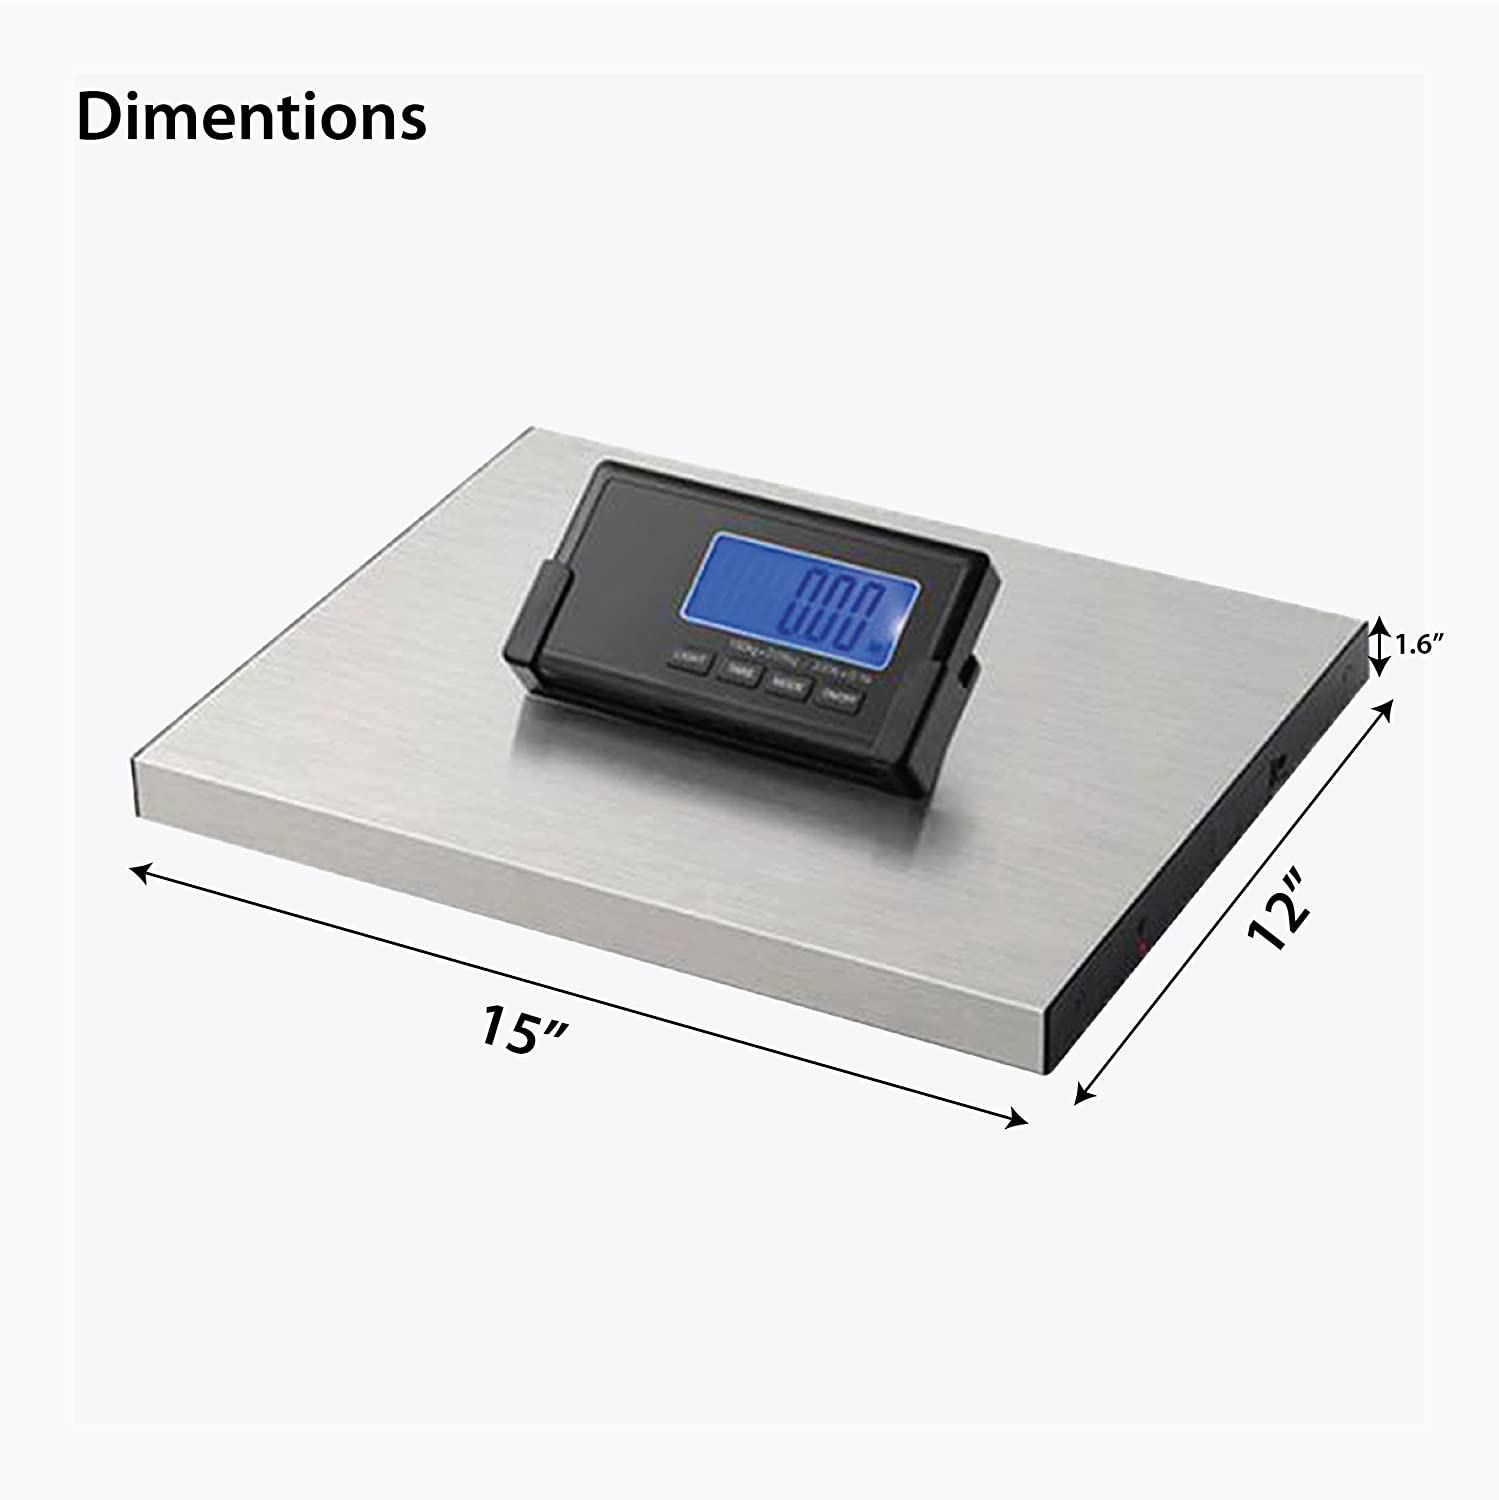 Shipping Scales, Digital Shipping Scales